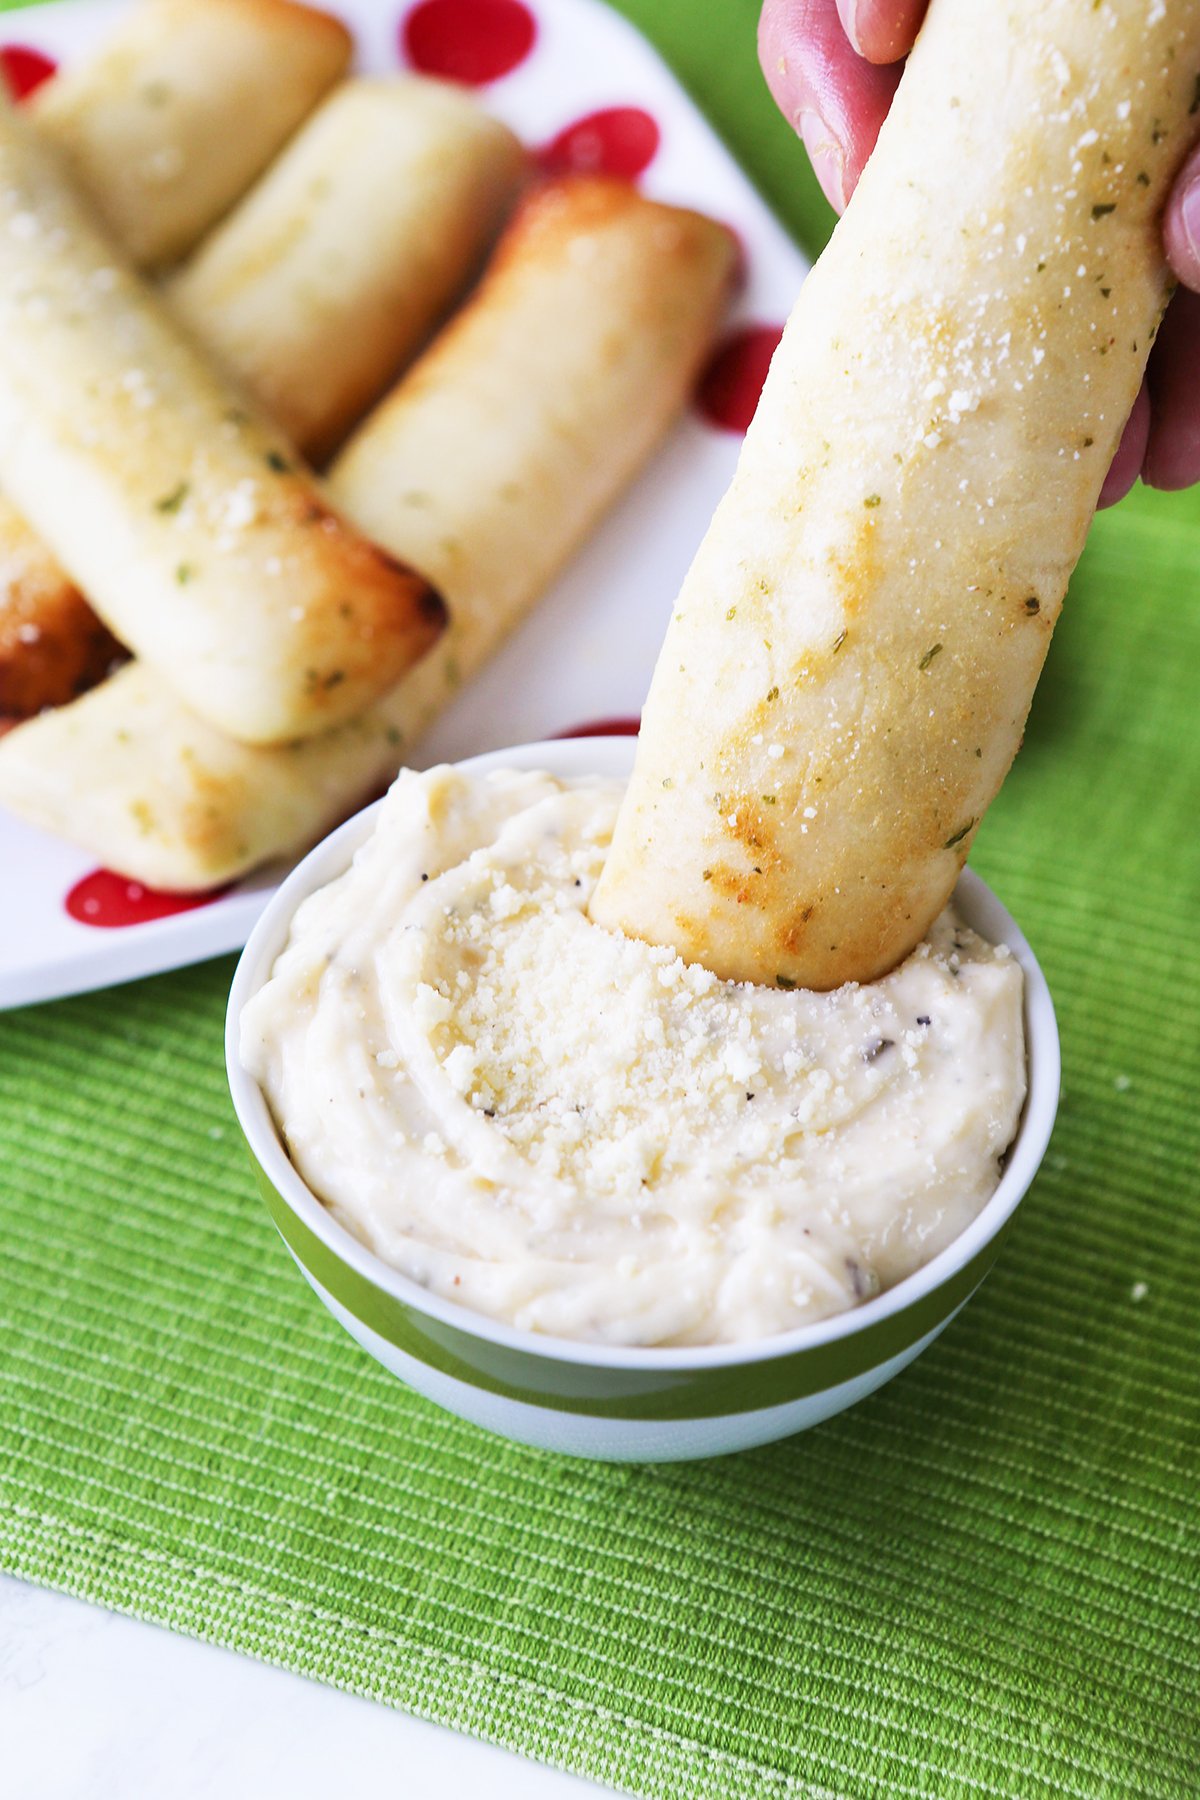 Hand dipping a breadstick into a bowl filled with garlic parmesan sauce.